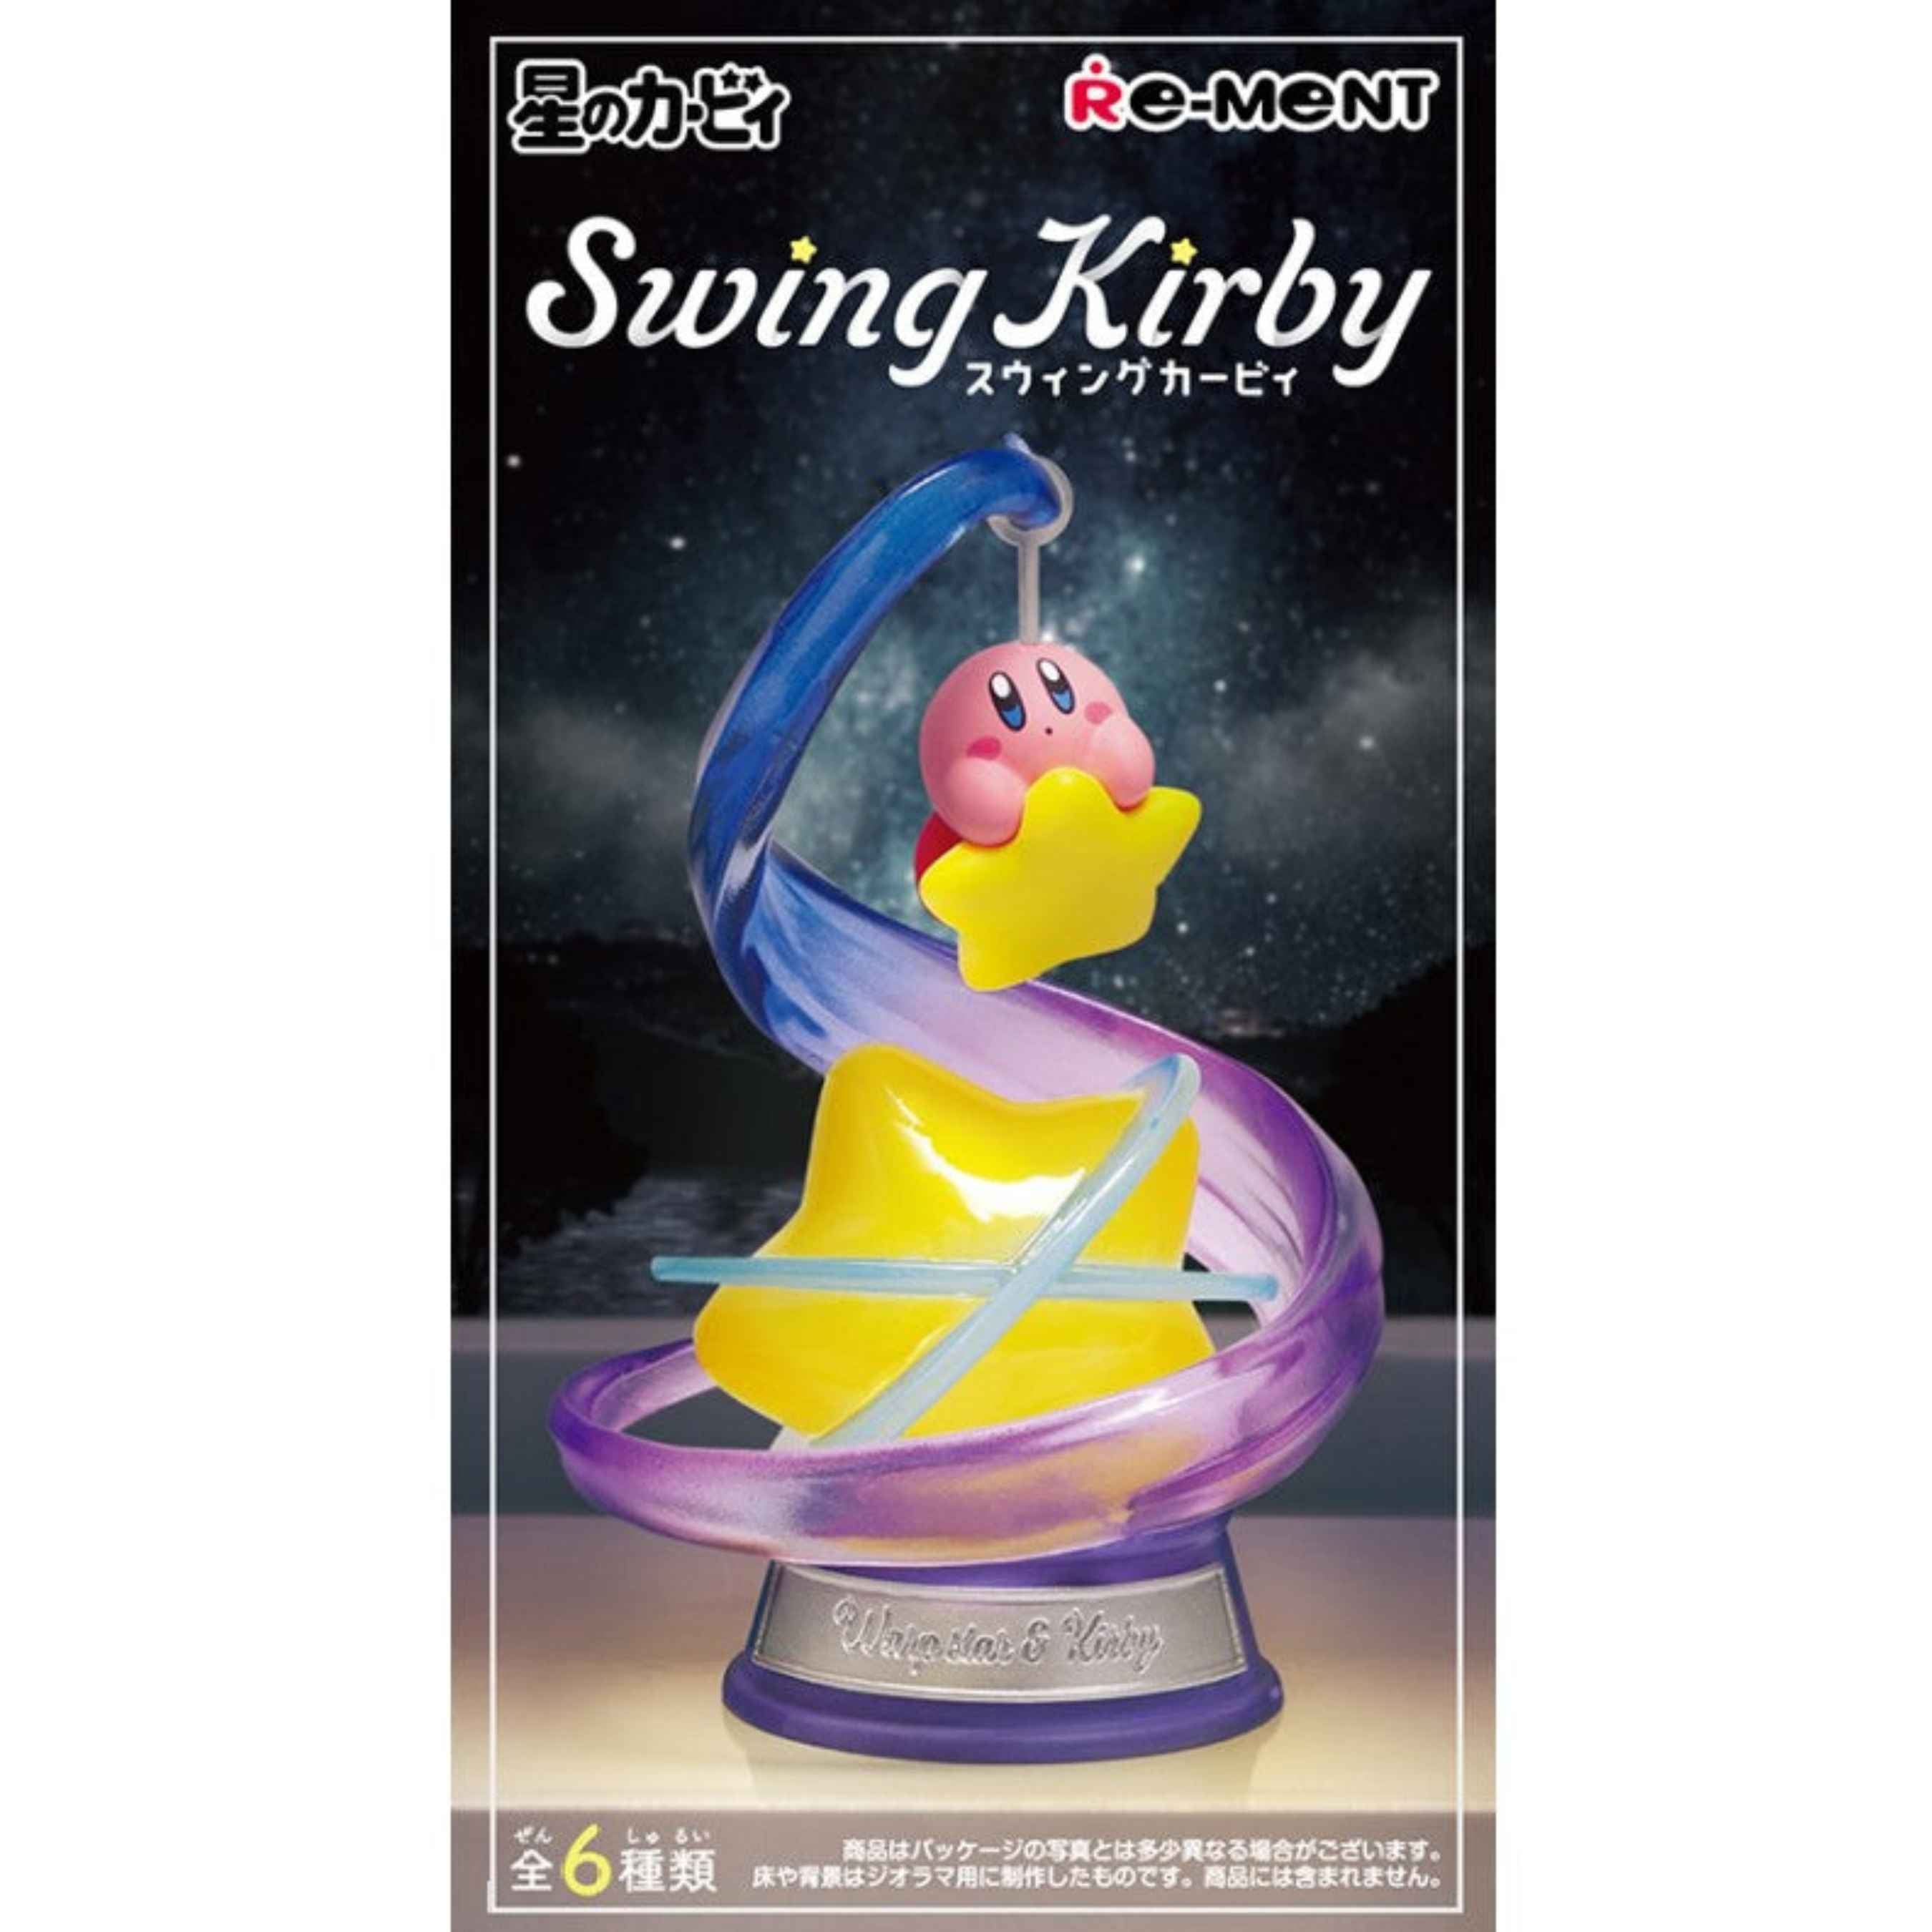 Kirby's Dream Land: Swing Kirby Blind Box Series by Re-Ment - Mindzai